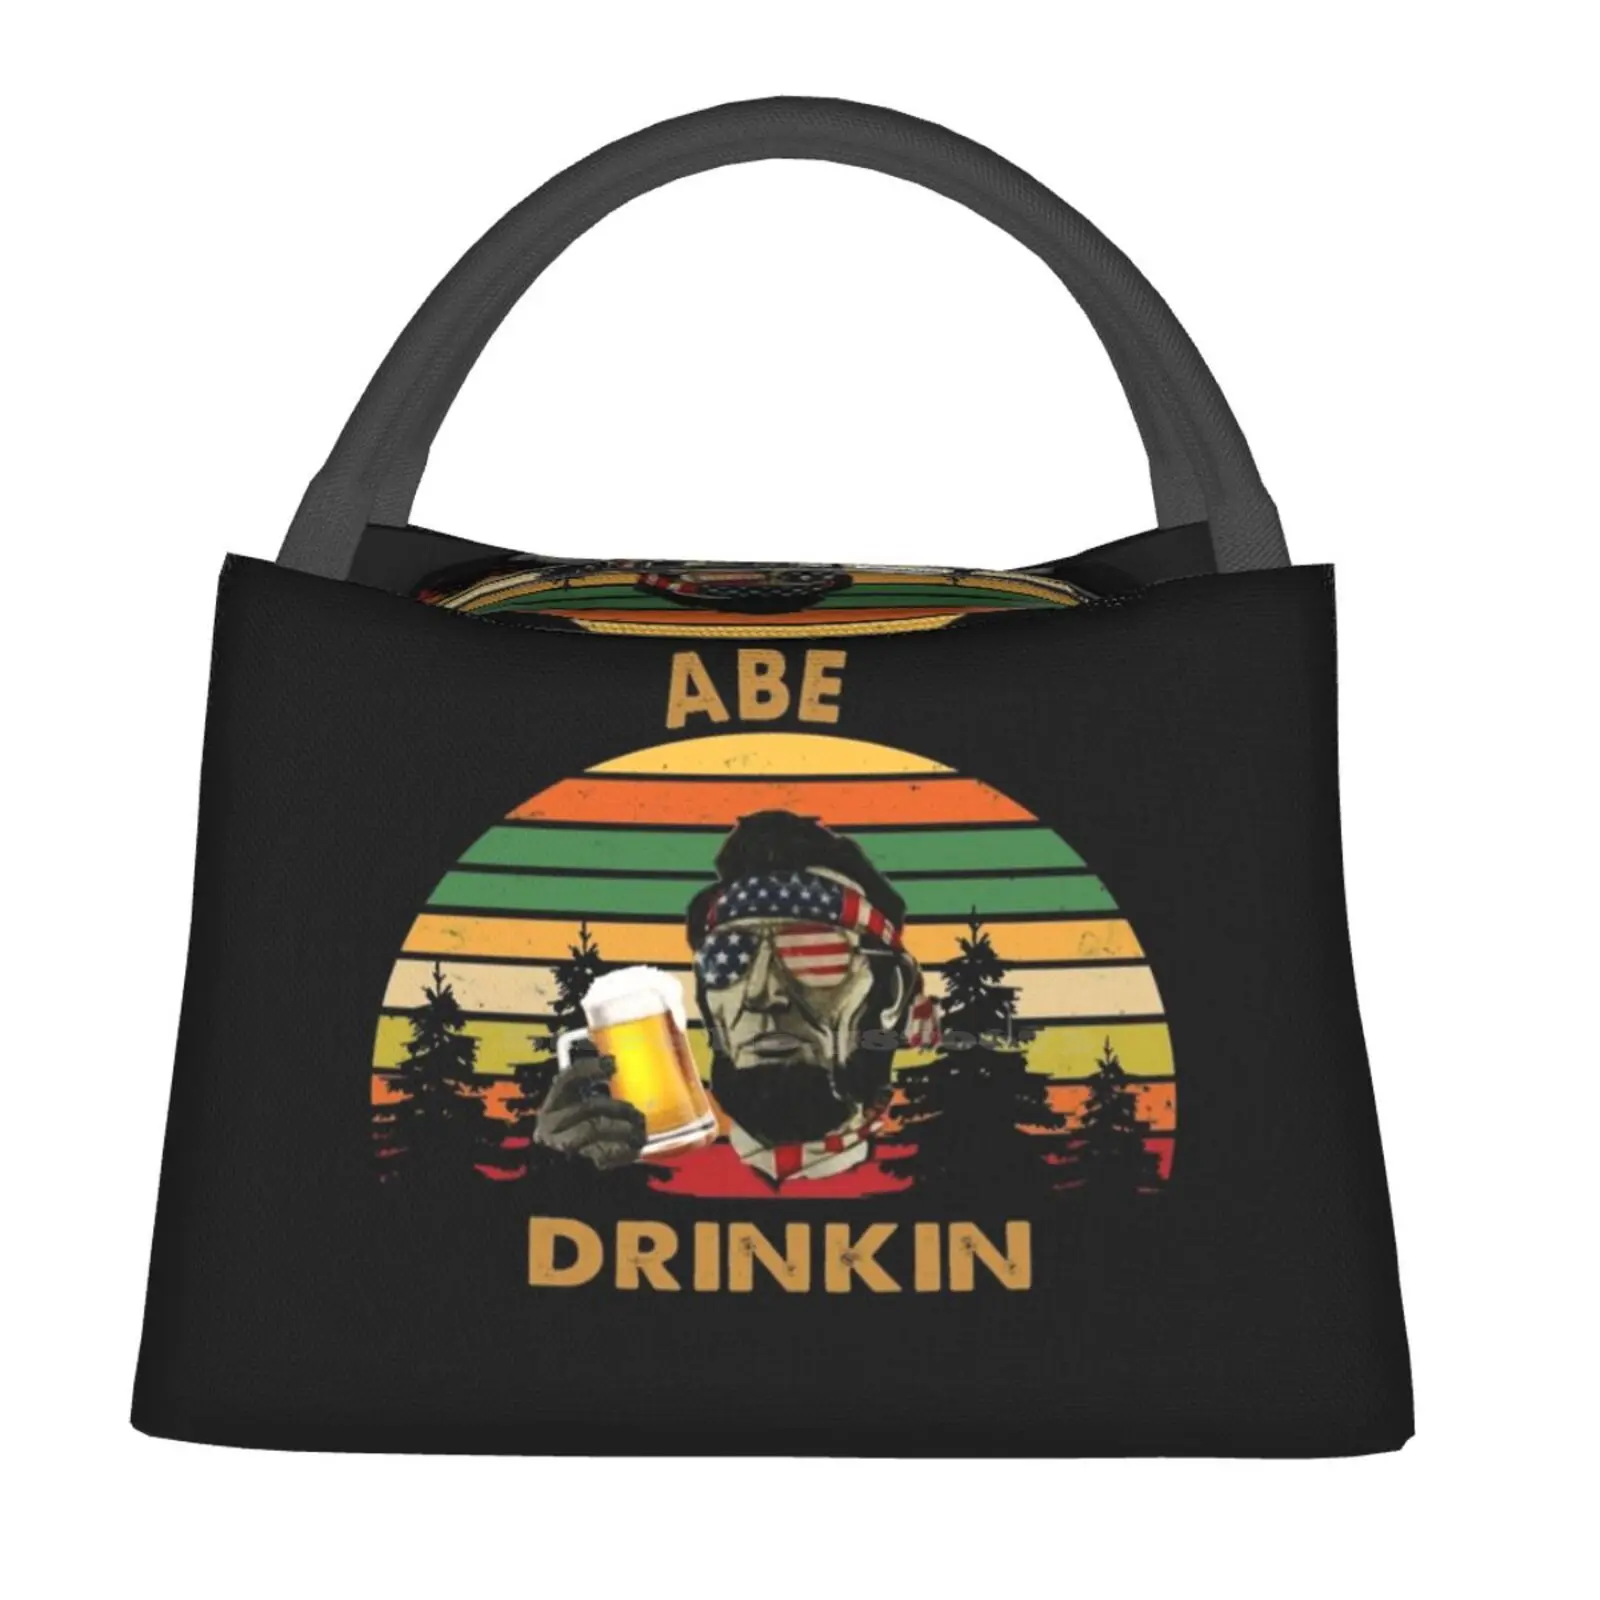 

Abe Drinkin Vintage American Flag 4Th Of July Thermal Cooler Tote Insulated Lunch Bag Abe Drinkin Vintage American Flag 4Th Of